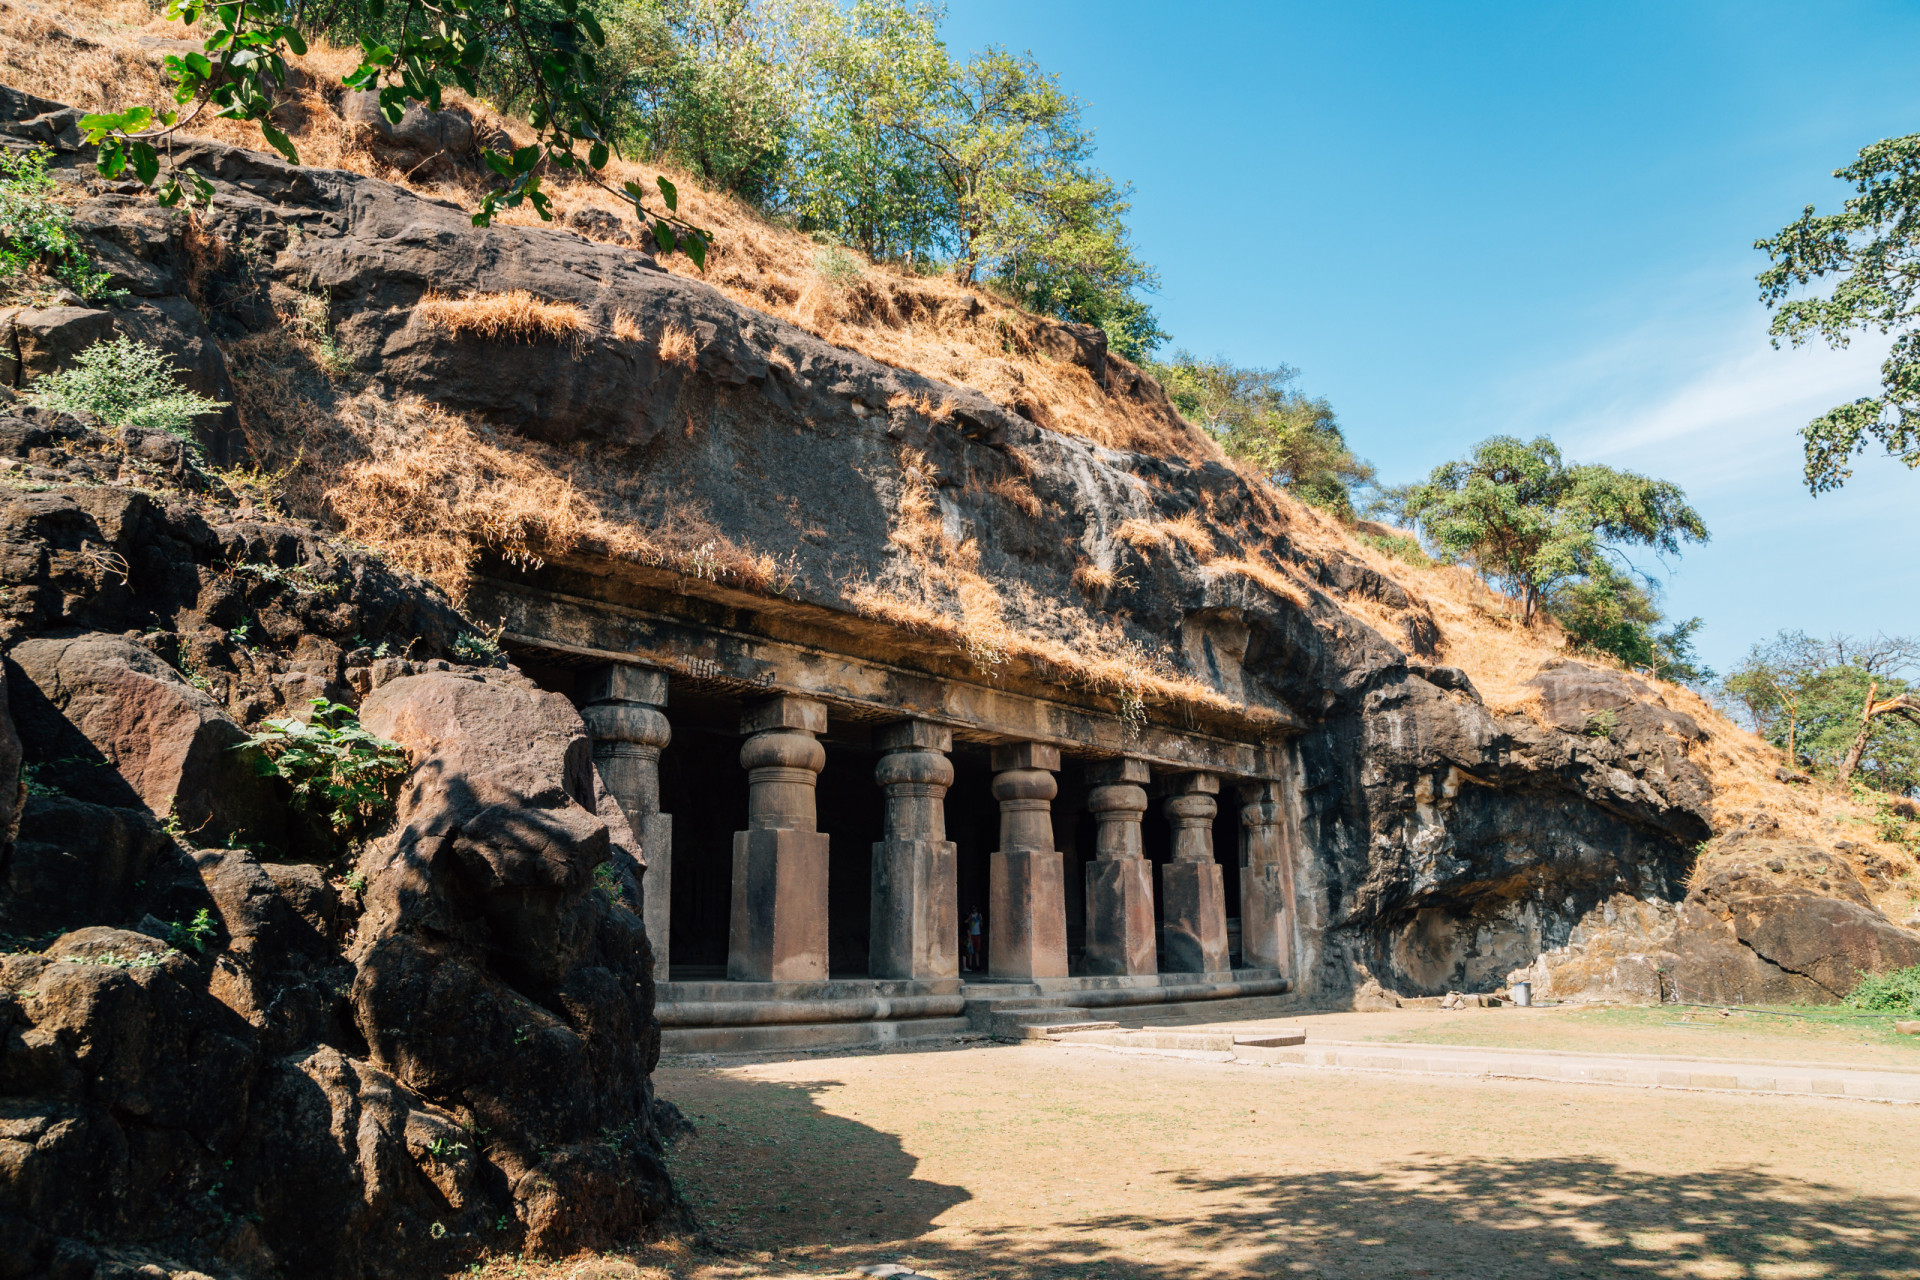 <p>UNESCO inscribed the ancient rock caves on Elephanta Island as a World Heritage Site in 1987. The island, one of a number set in Mumbai Harbor, attracts numerous visitors eager to gaze upon the collection of cave temples dedicated to the Hindu god Shiva.</p><p><a href="https://www.msn.com/en-my/community/channel/vid-7xx8mnucu55yw63we9va2gwr7uihbxwc68fxqp25x6tg4ftibpra?cvid=94631541bc0f4f89bfd59158d696ad7e">Follow us and access great exclusive content every day</a></p>